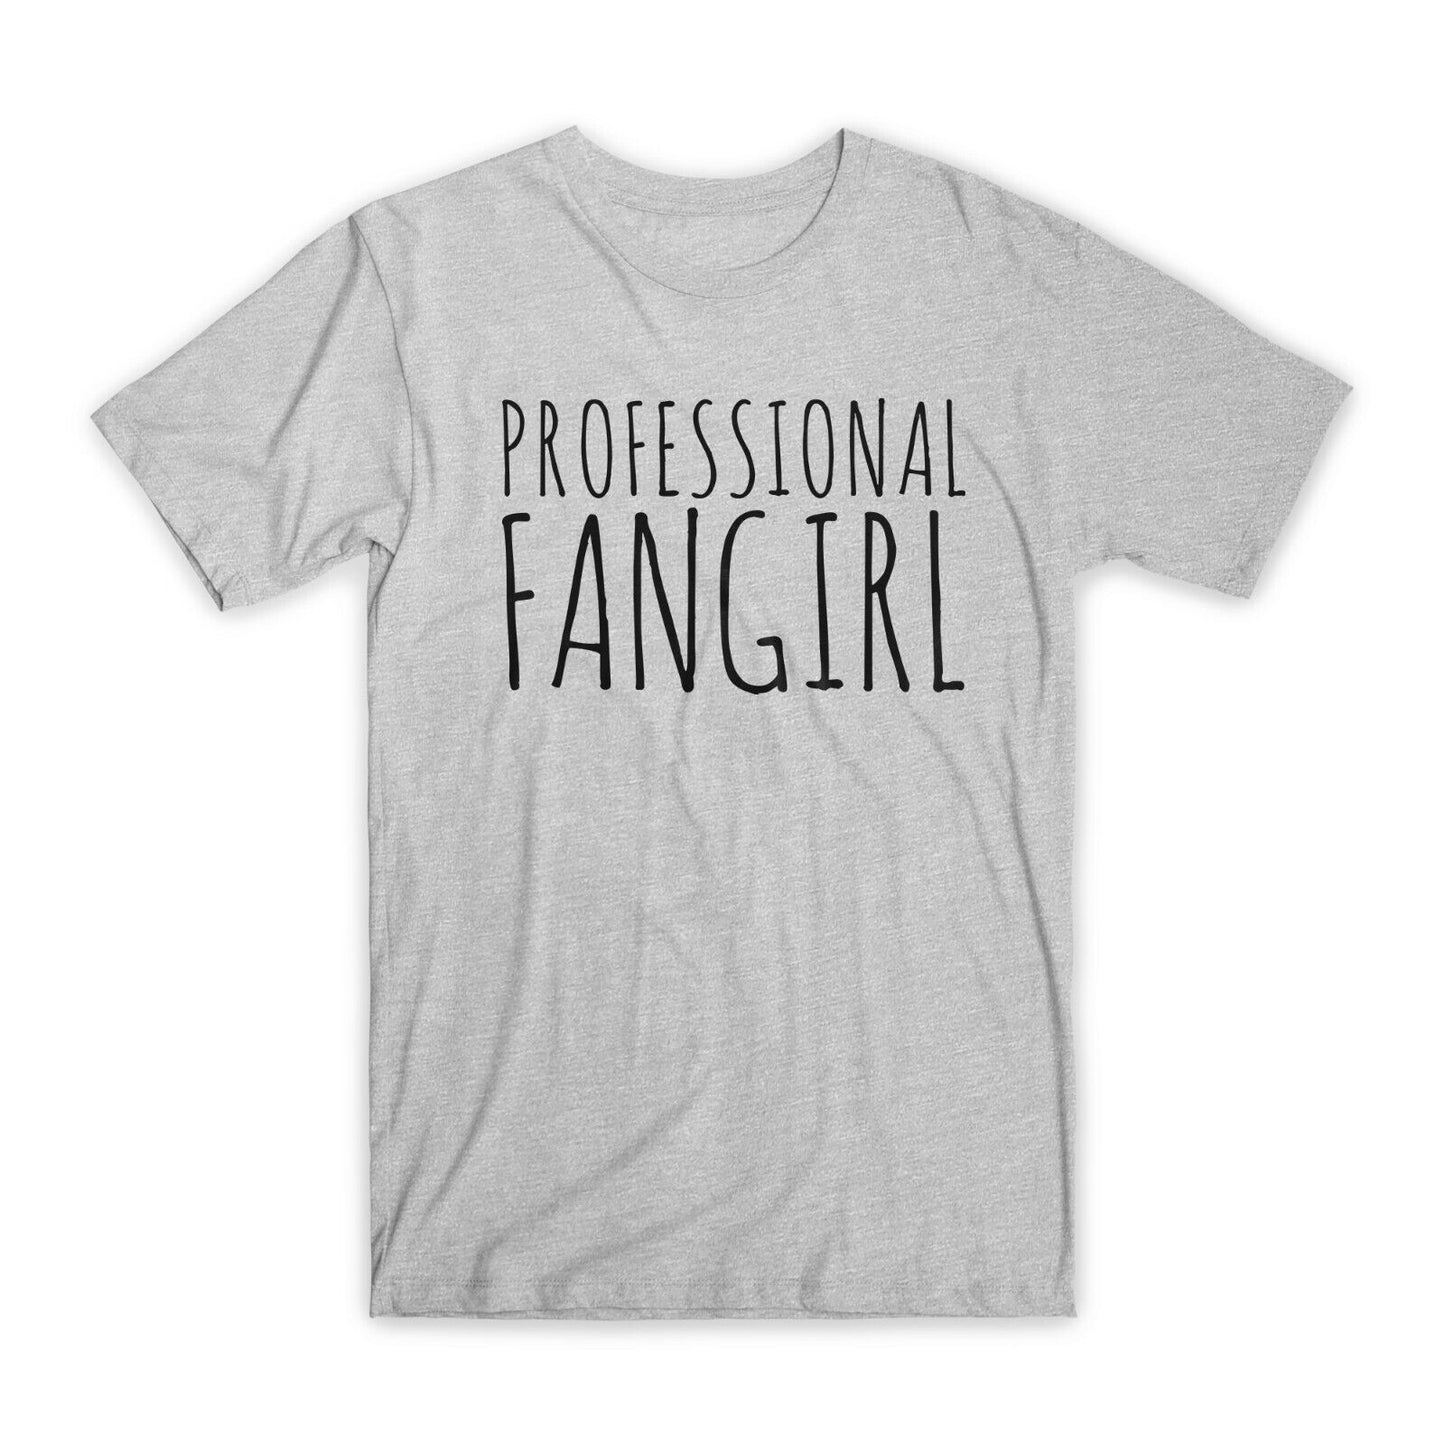 Professional Fangirl T-Shirt Premium Soft Cotton Crew Neck Funny Tees Gifts NEW